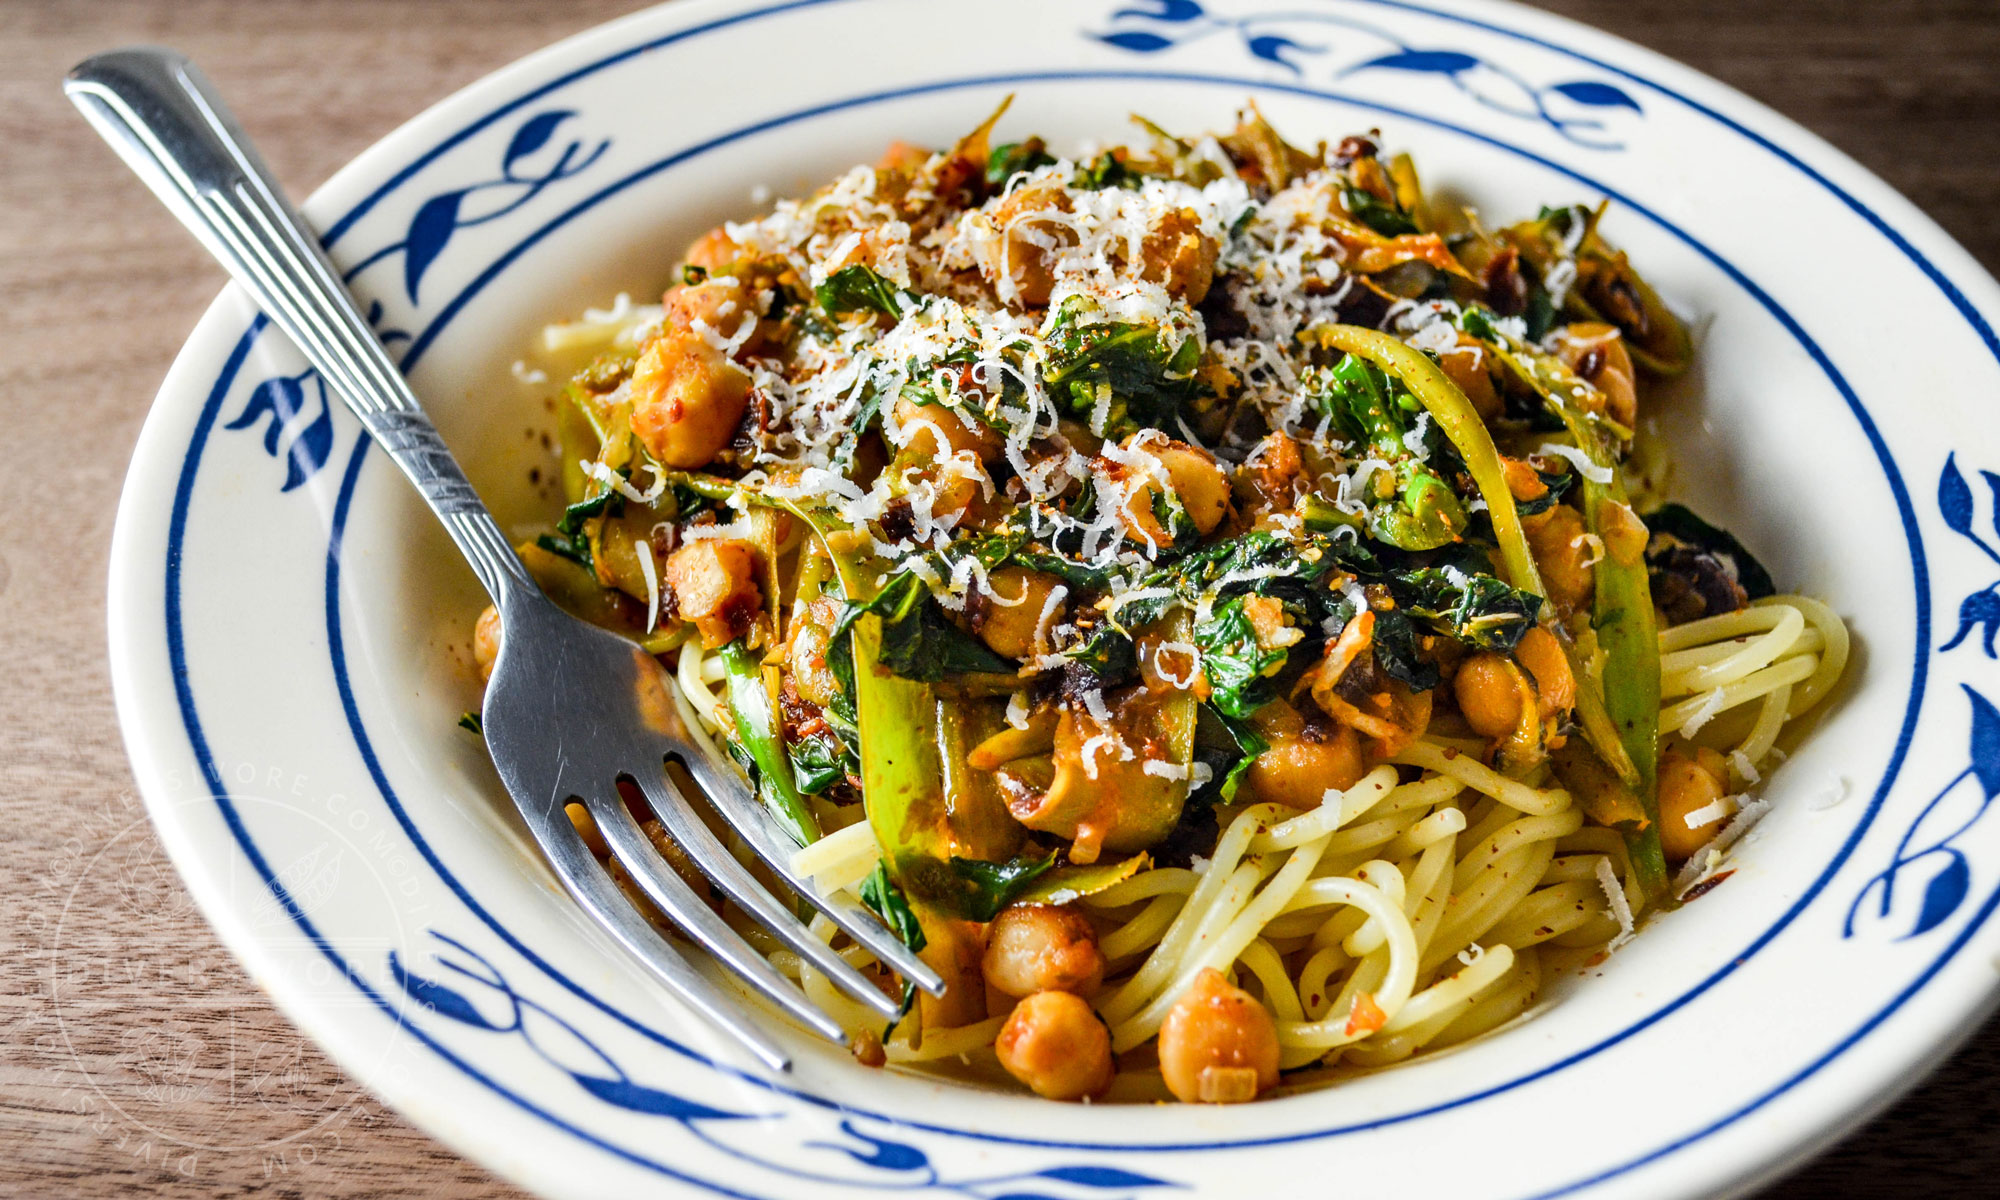 Featured image for “Chickpea and Gai Lan Spaghettini”